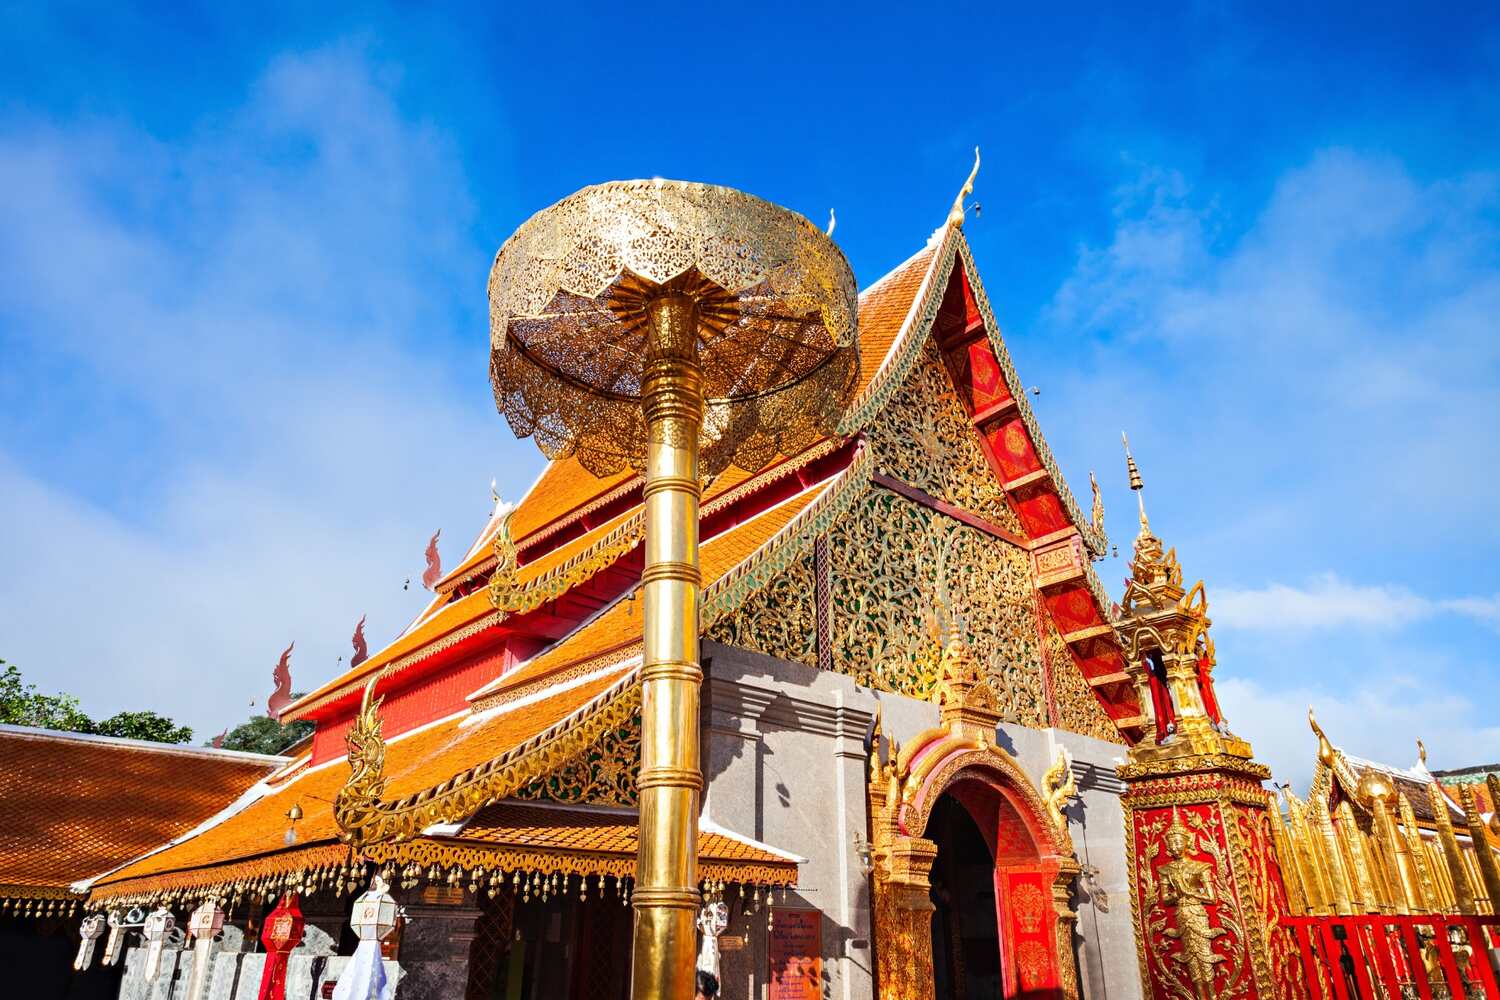 Doi suthep tours - A golden spire of a temple with intricate red and blue decorations against a blue sky with fluffy clouds.